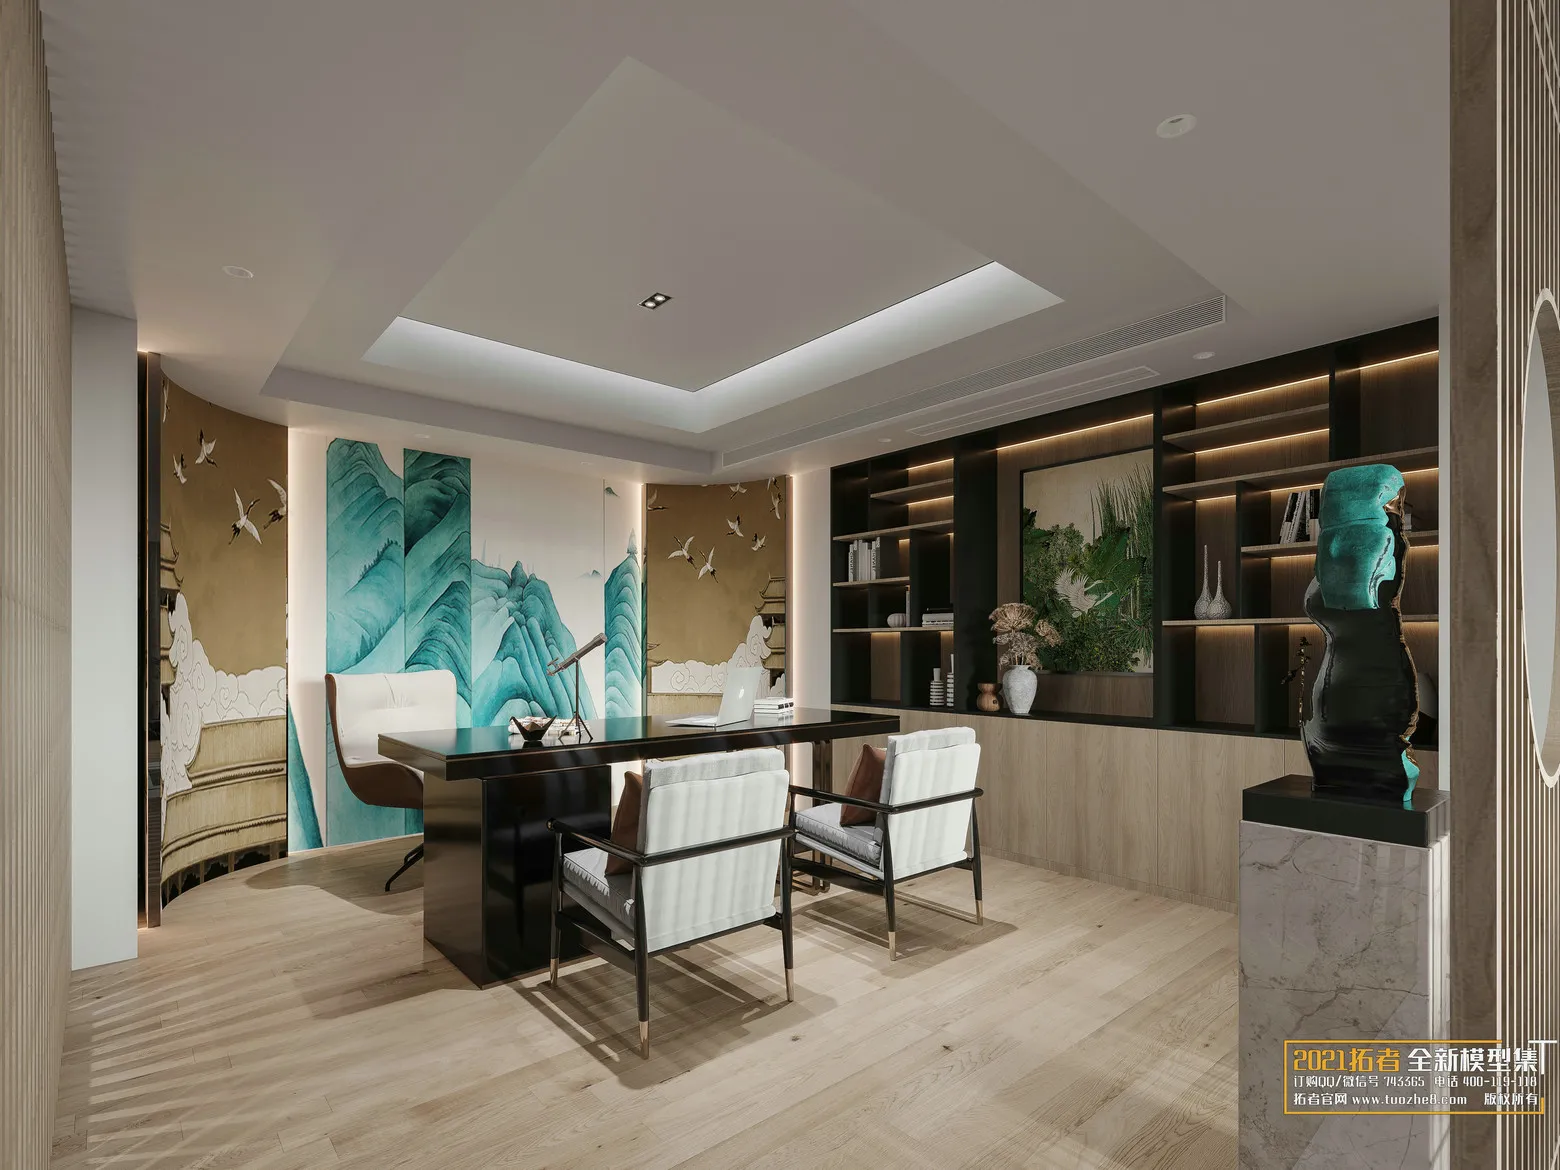 EXTENSION 2021 – 1. LIVING ROOM – 1.2. CHINESE STYLES – 08 – CORONA